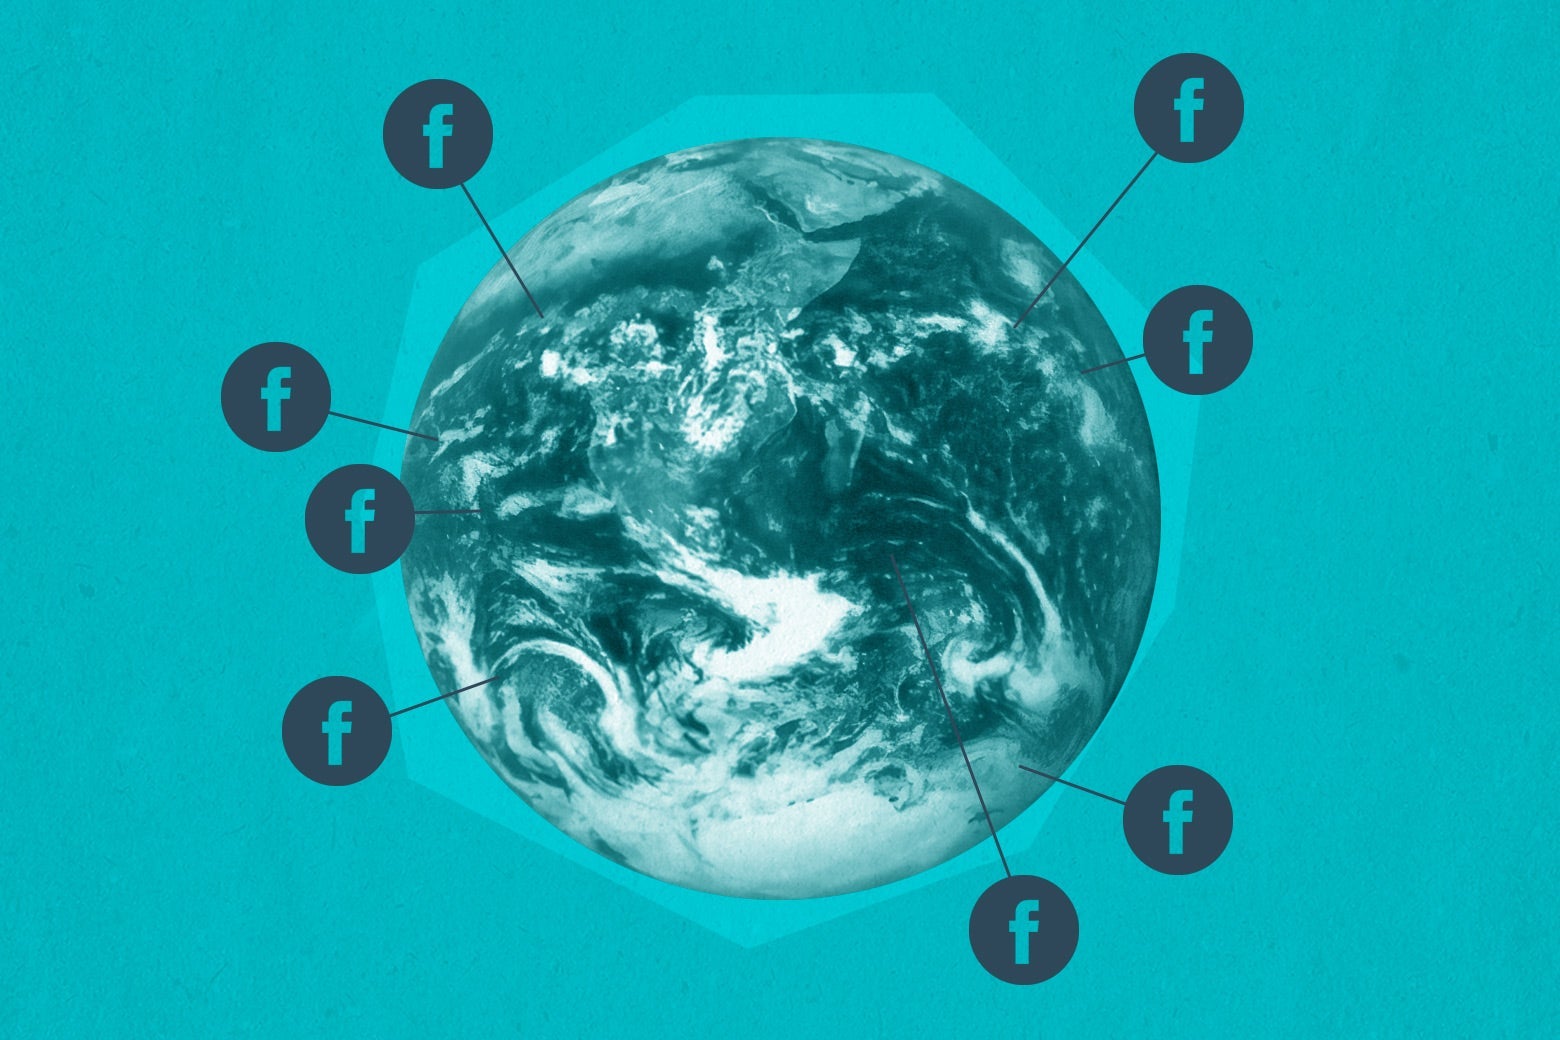 Globe surrounded by Facebook logos.